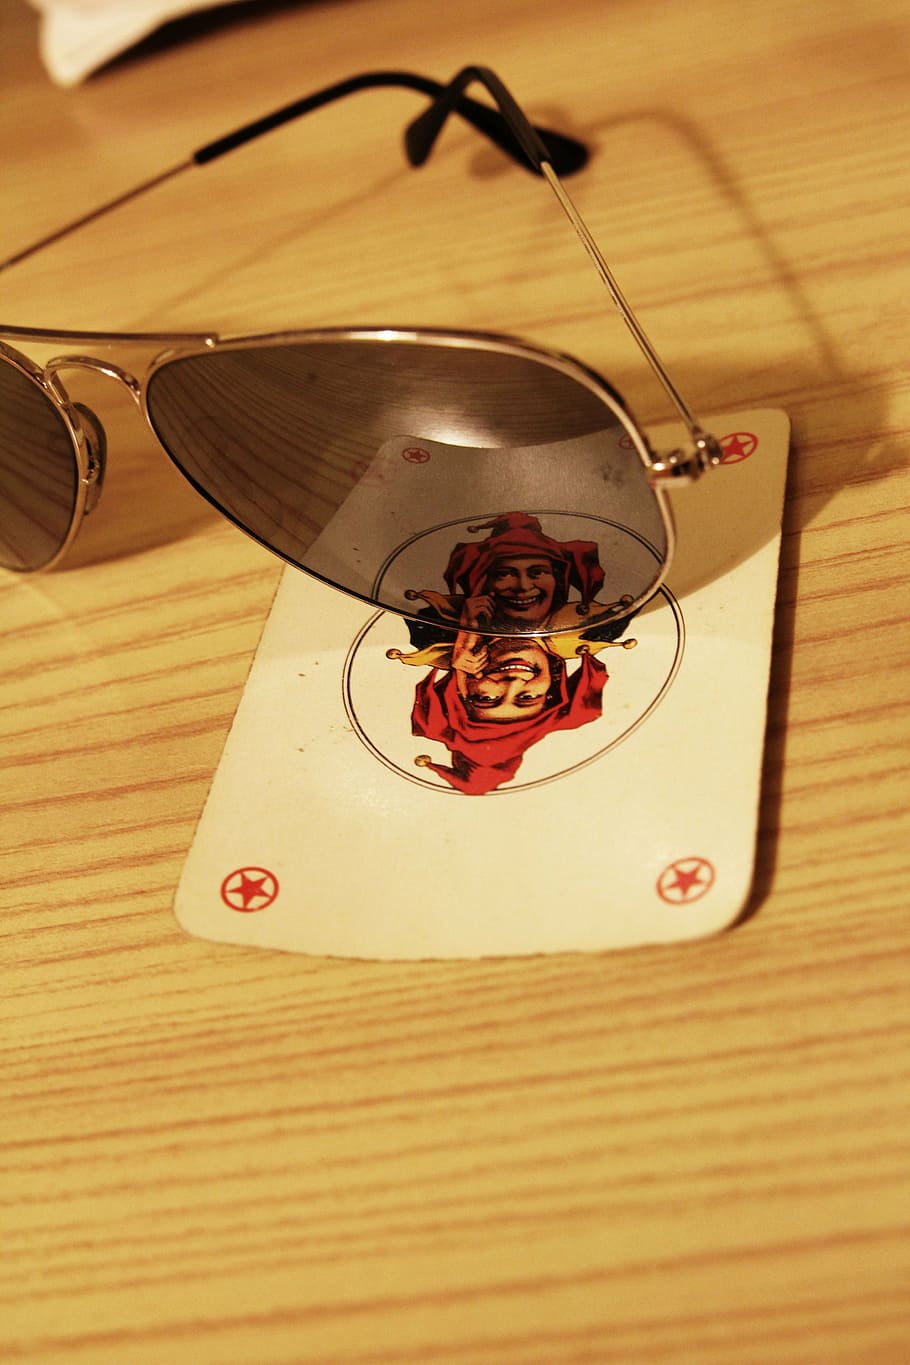 sunglasses, playing card, wildcard, joker, wood, table, mirror, red, close-up, indoors